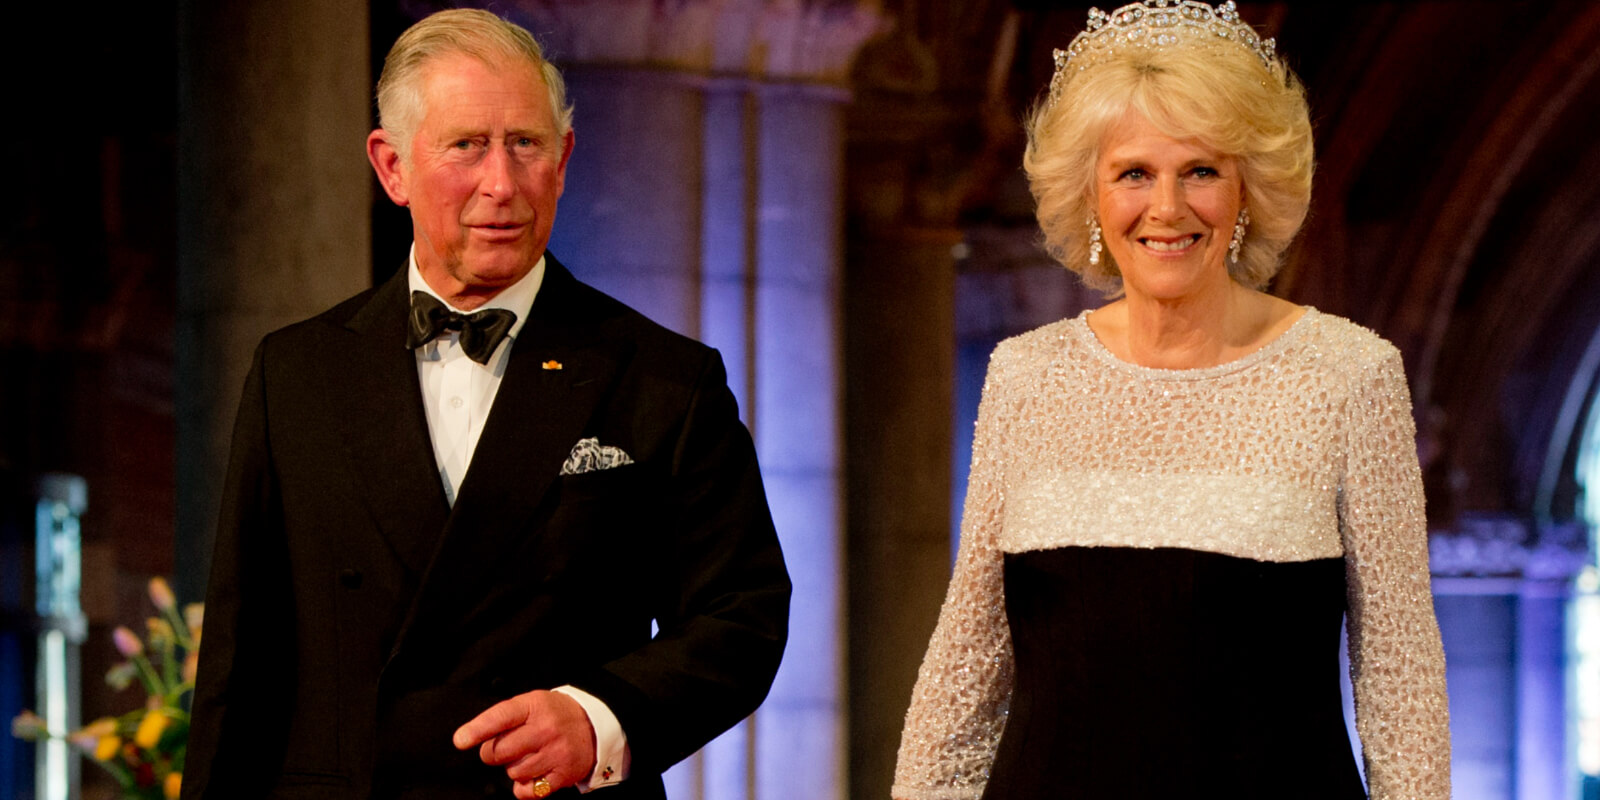 King Charles III and Camilla Parker Bowles pictured in 2013 in Amsterdam, Netherlands.